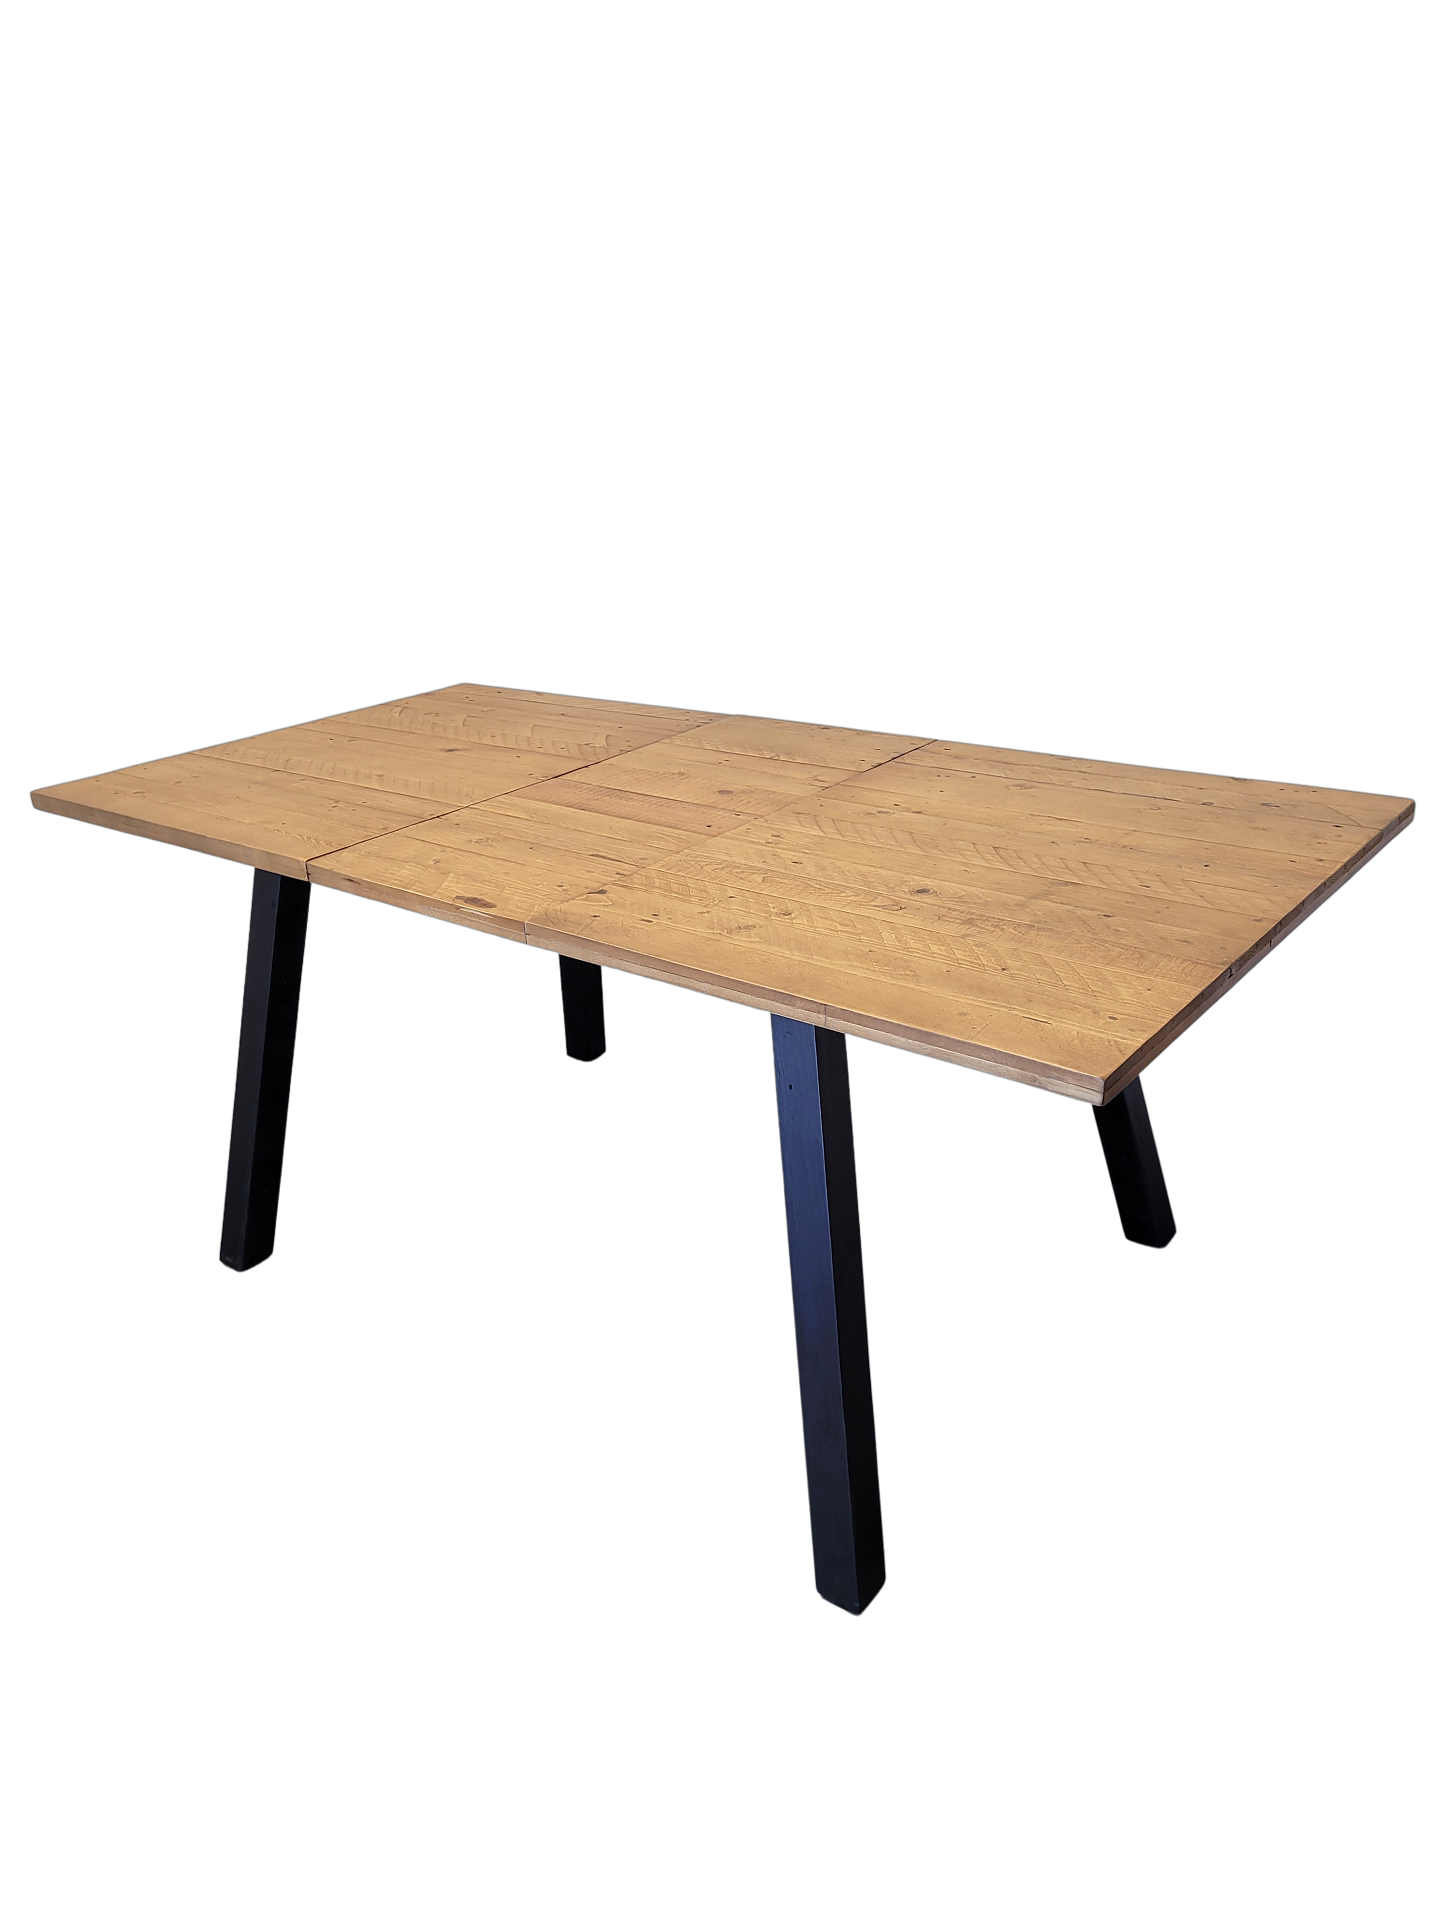 Carter Dining Table